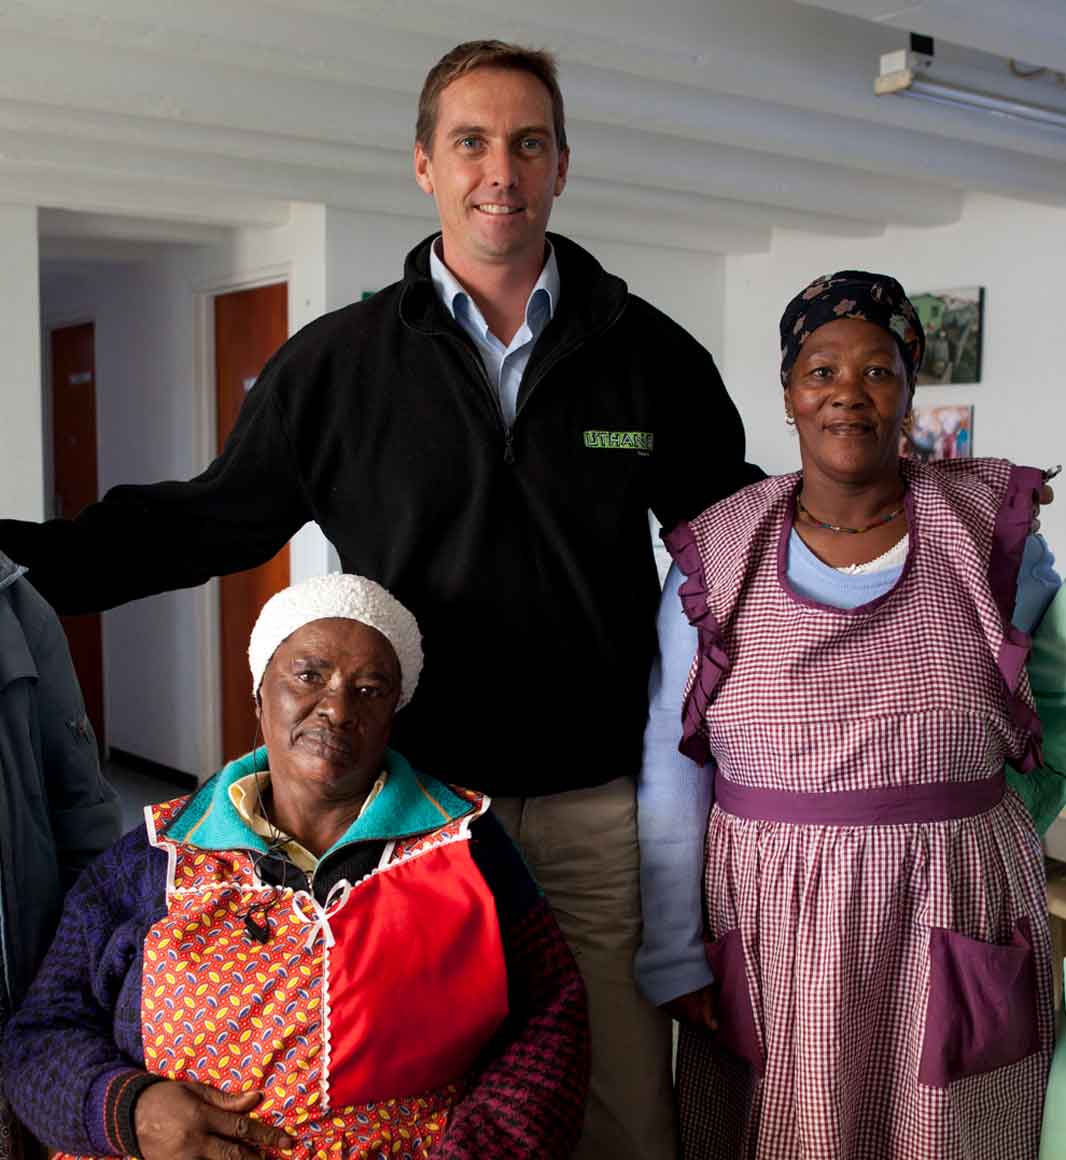 Visiting community project in Cape Town